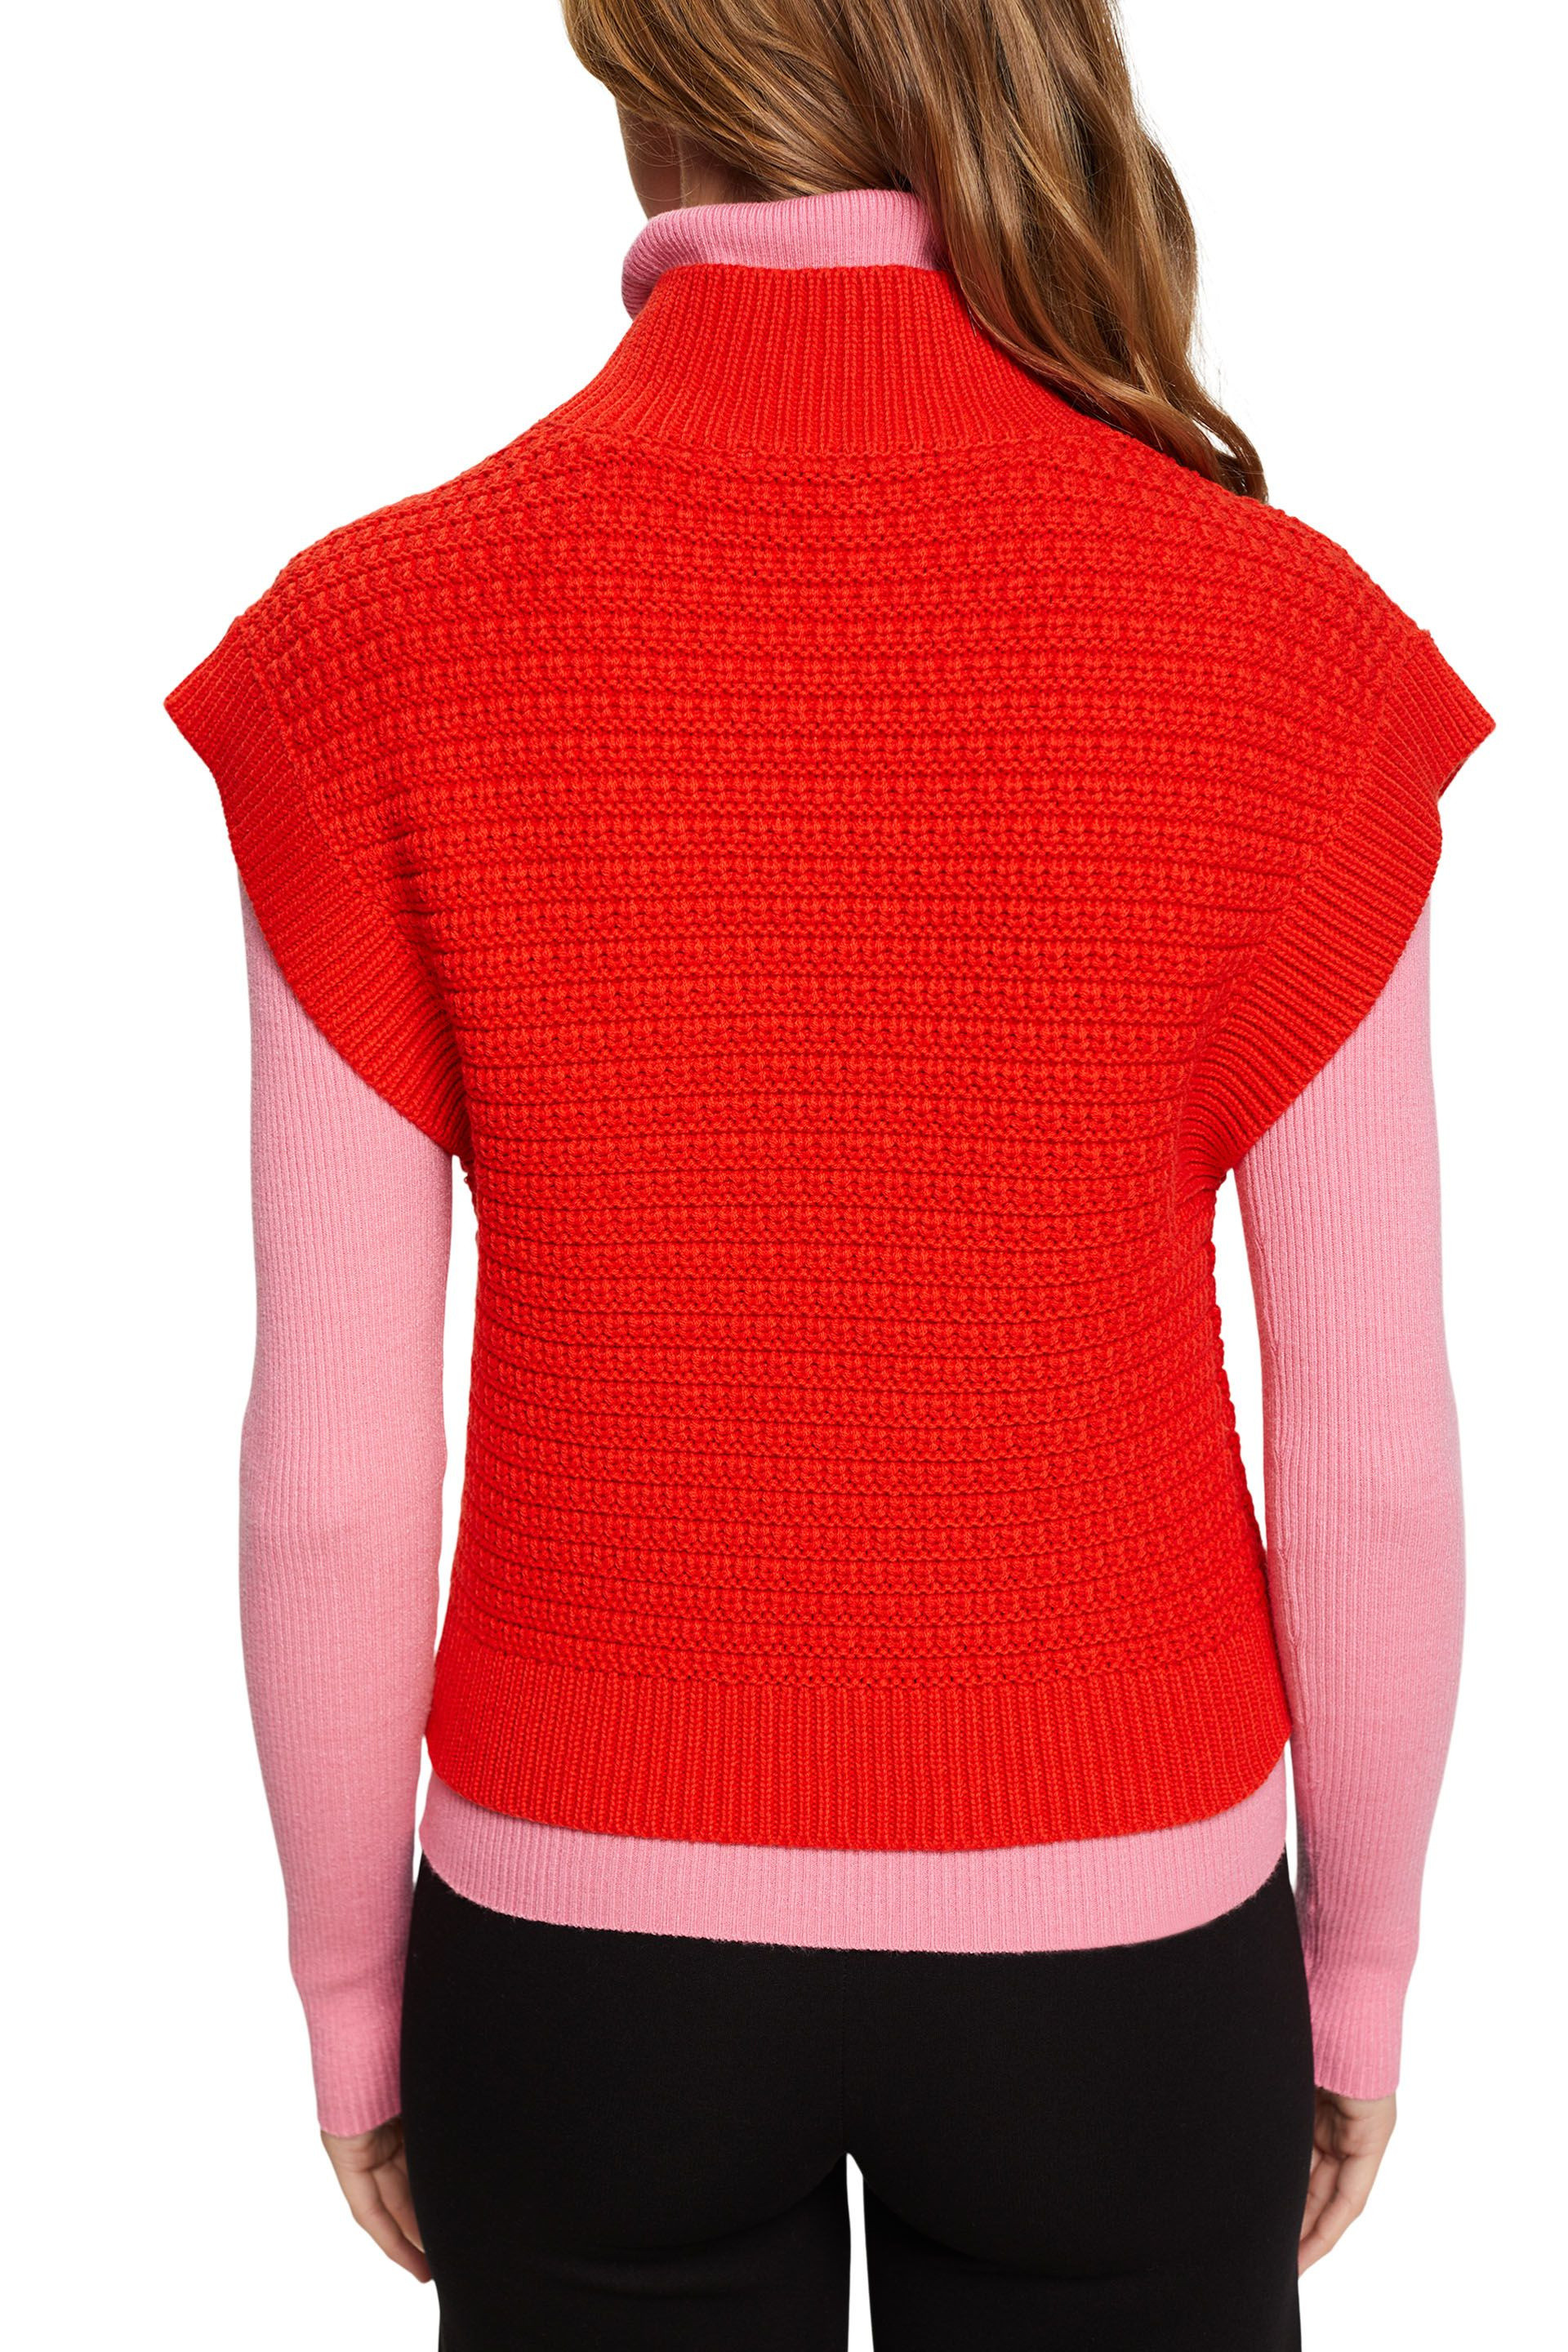 Esprit - Gilet a maglia in misto cotone, Rosso, large image number 2